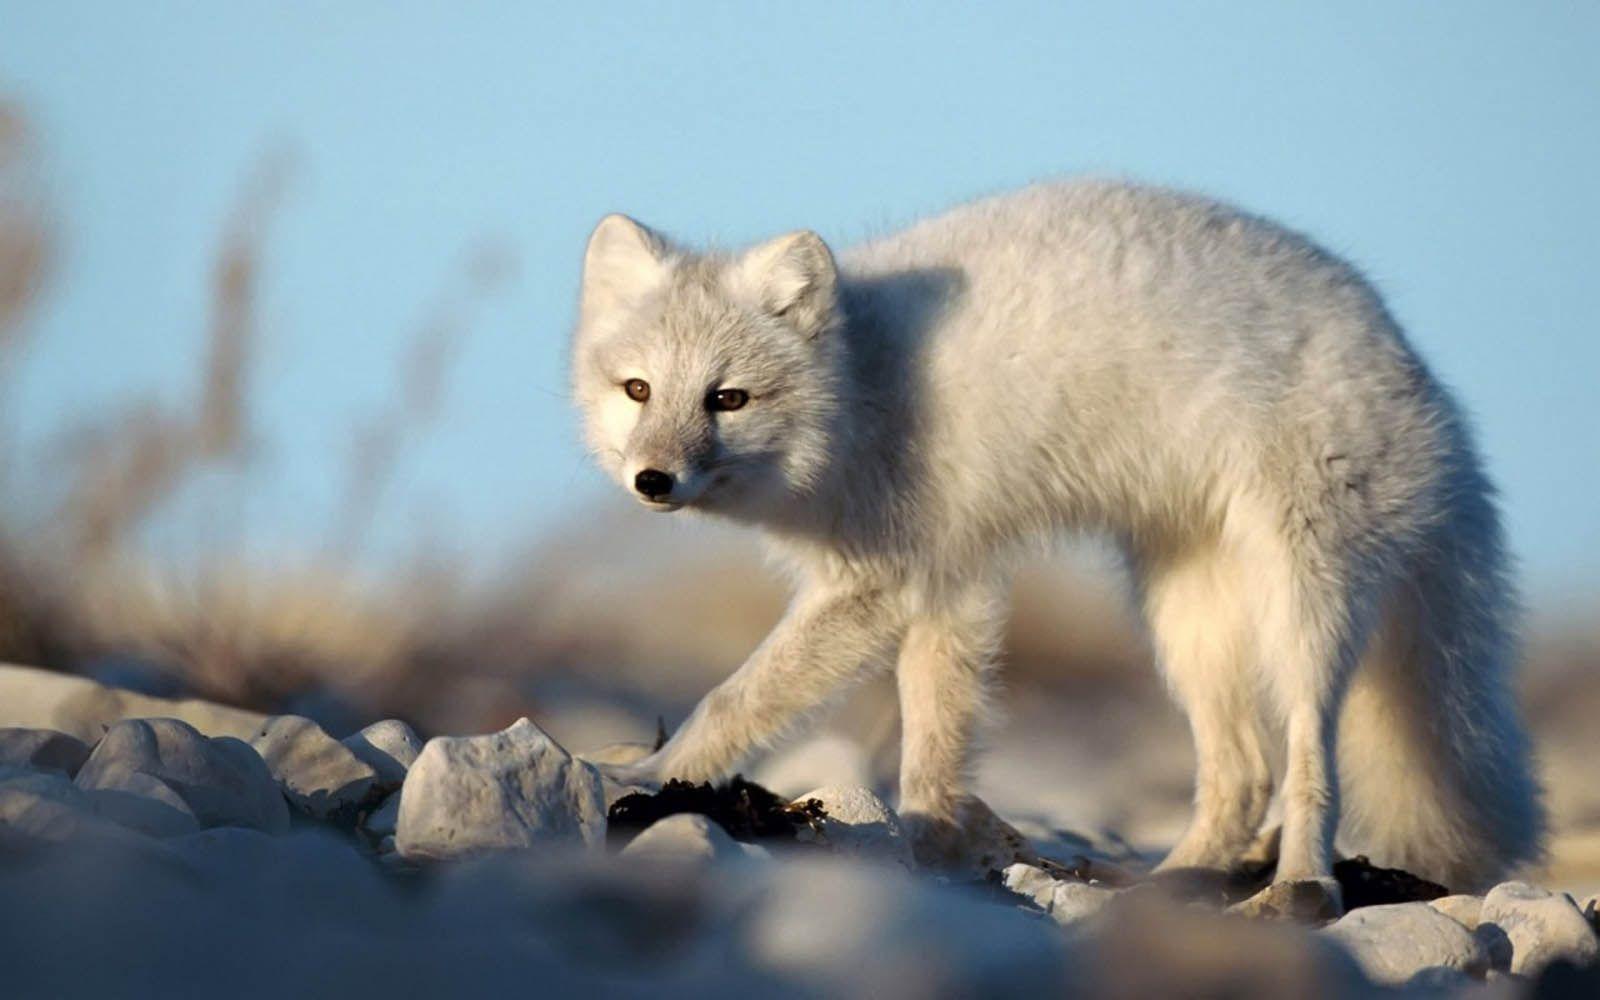 Tag: Arctic Fox Wallpaper, Background, Photo, Image